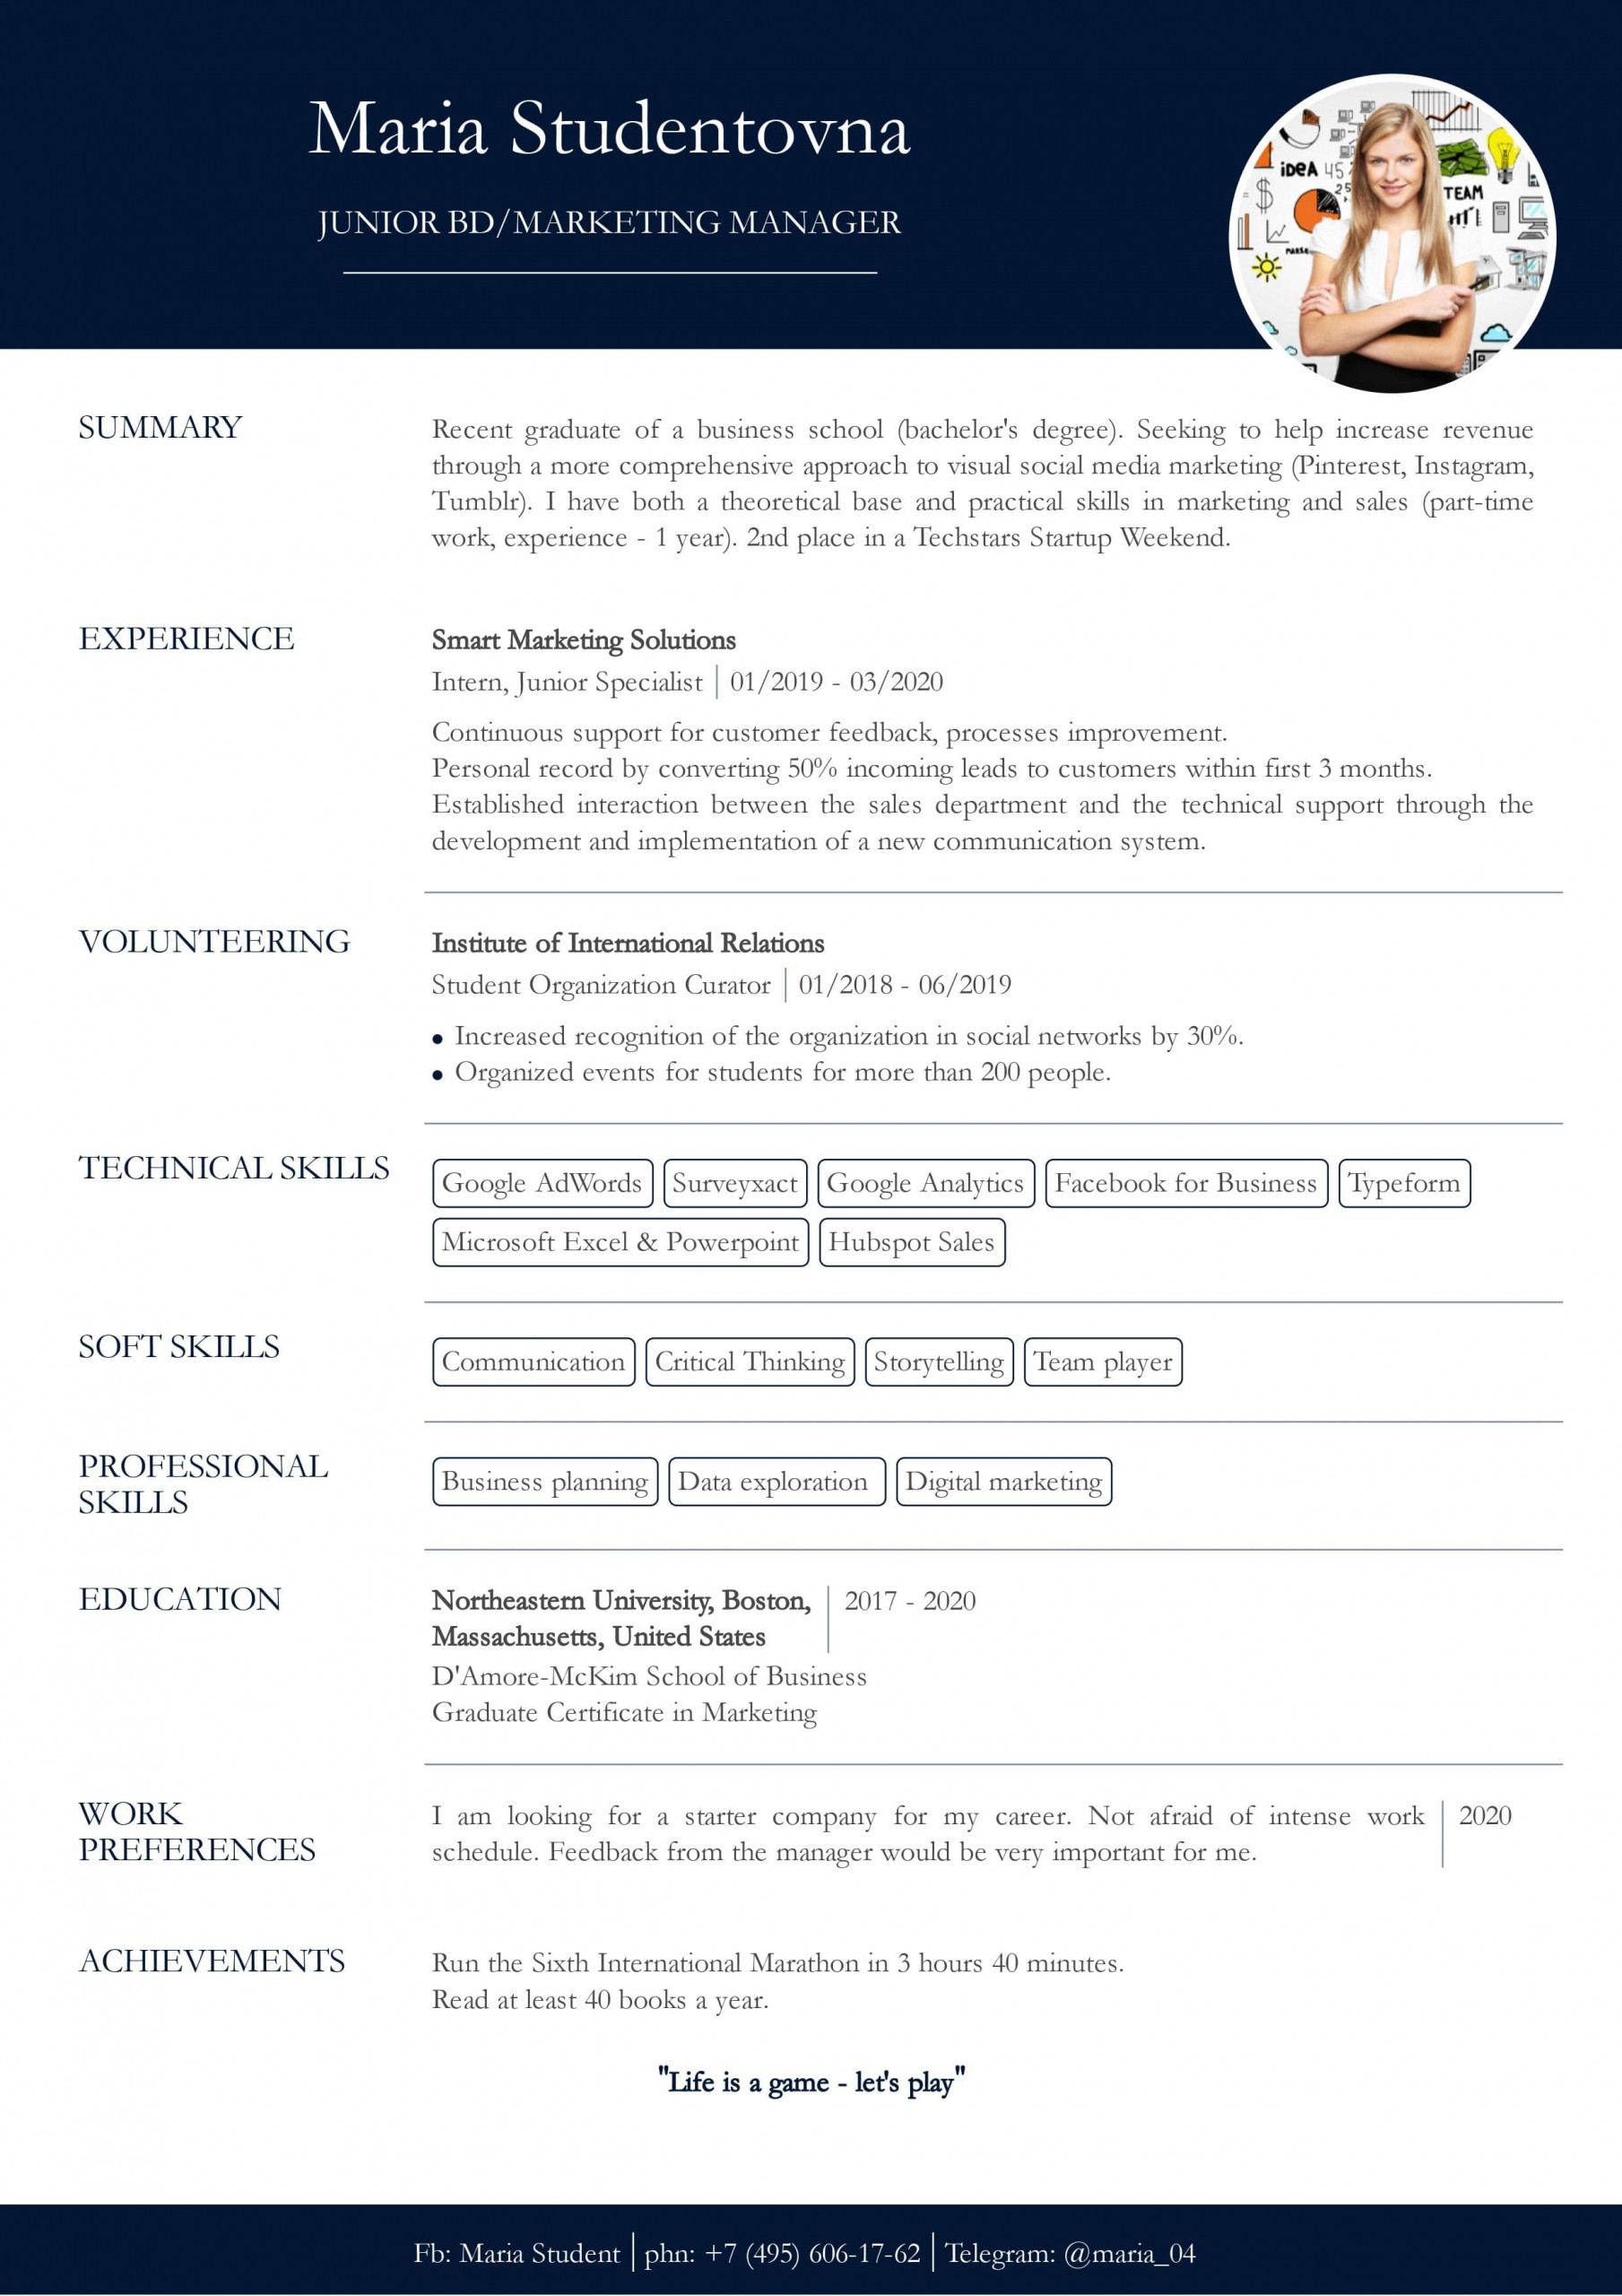 Sample Resume for College Graduate with No Experience Resume with No Work Experience. Sample for Students. – Cv2you Blog